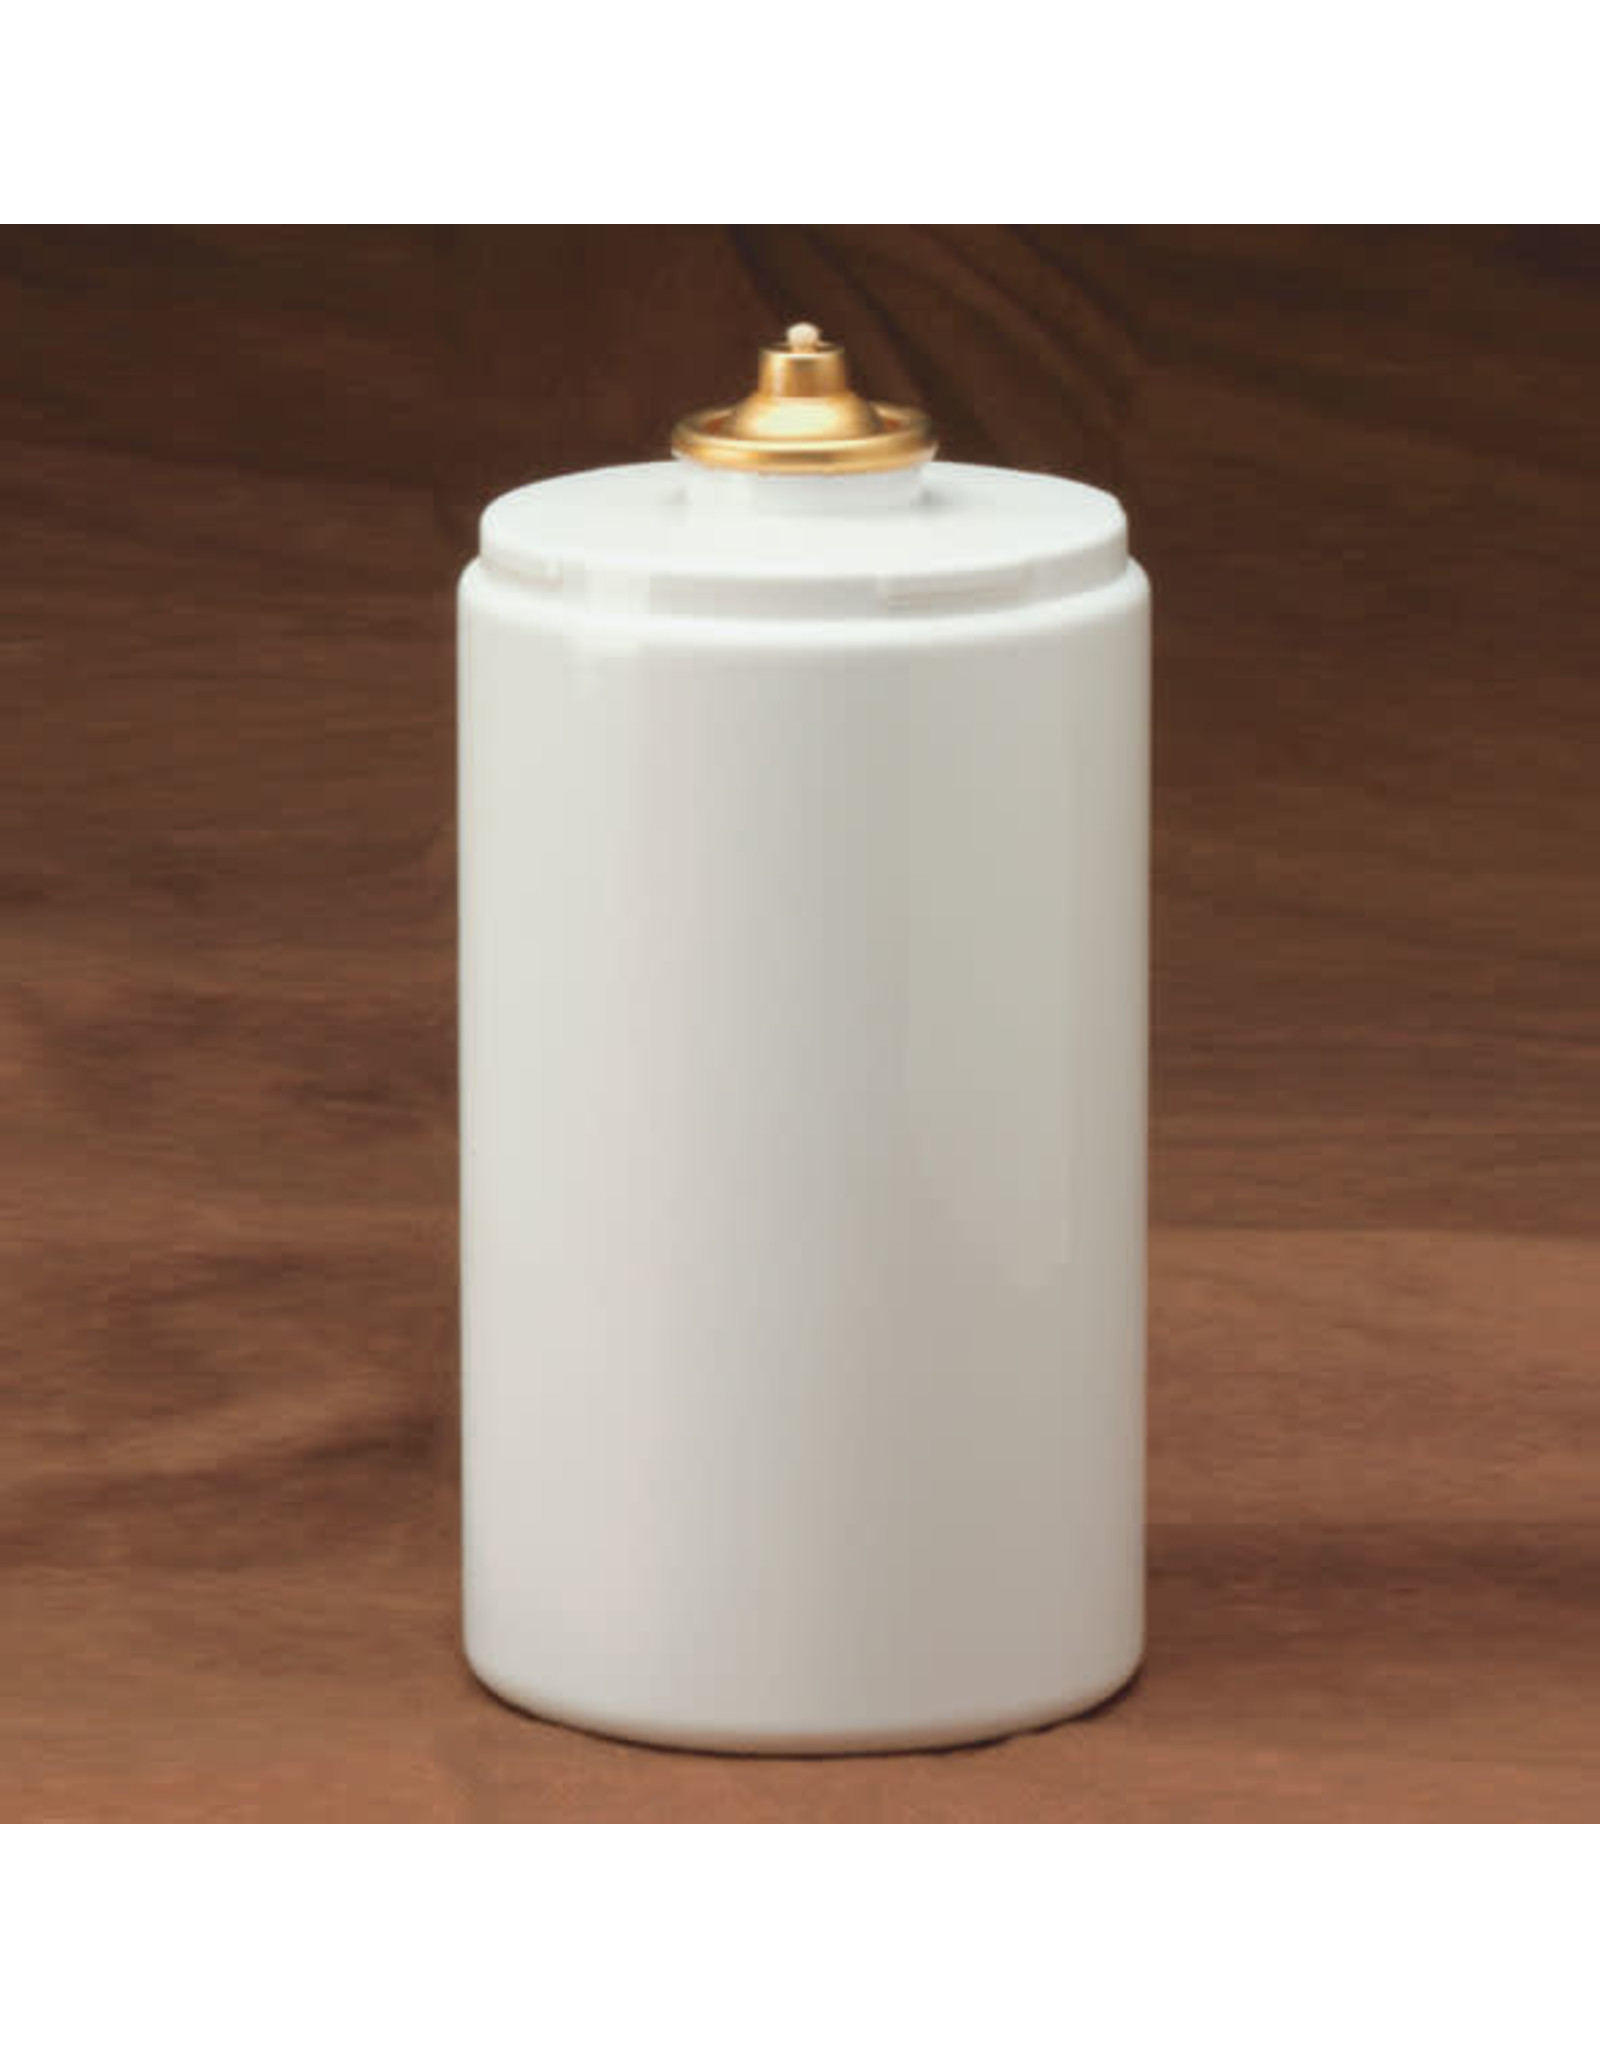 Emkay (Muench-Kreuzer) Disposable Oil Container 170-hr (Each)